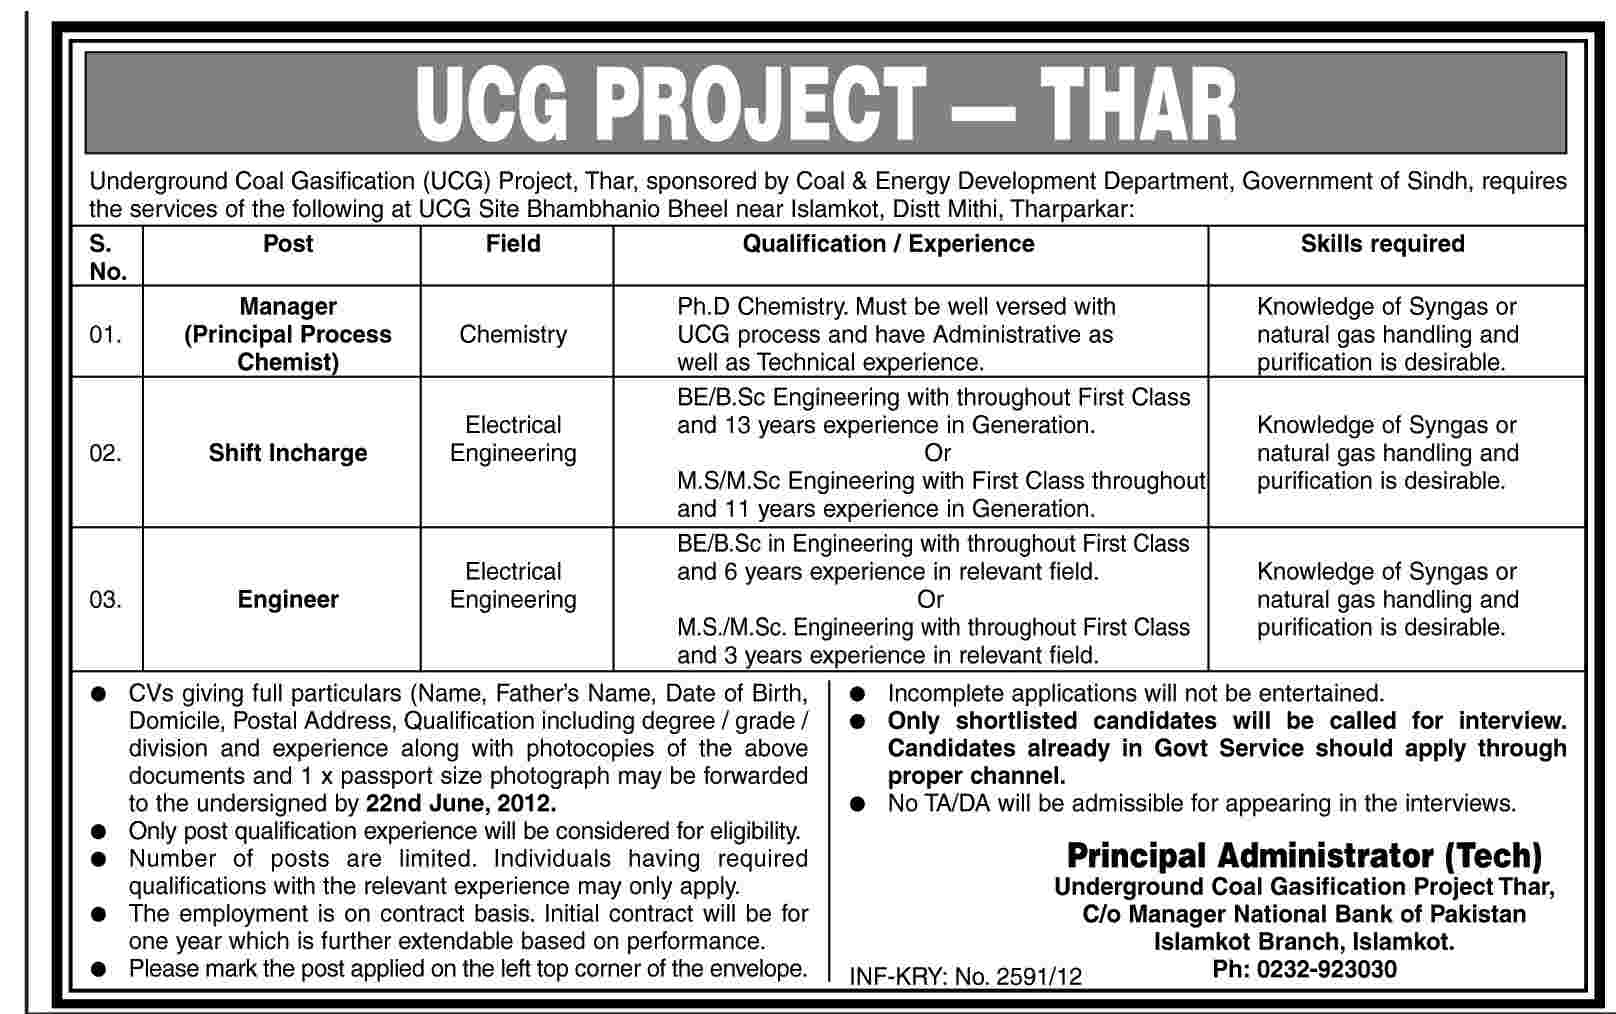 Manager and Engineer Required Under UCG Project